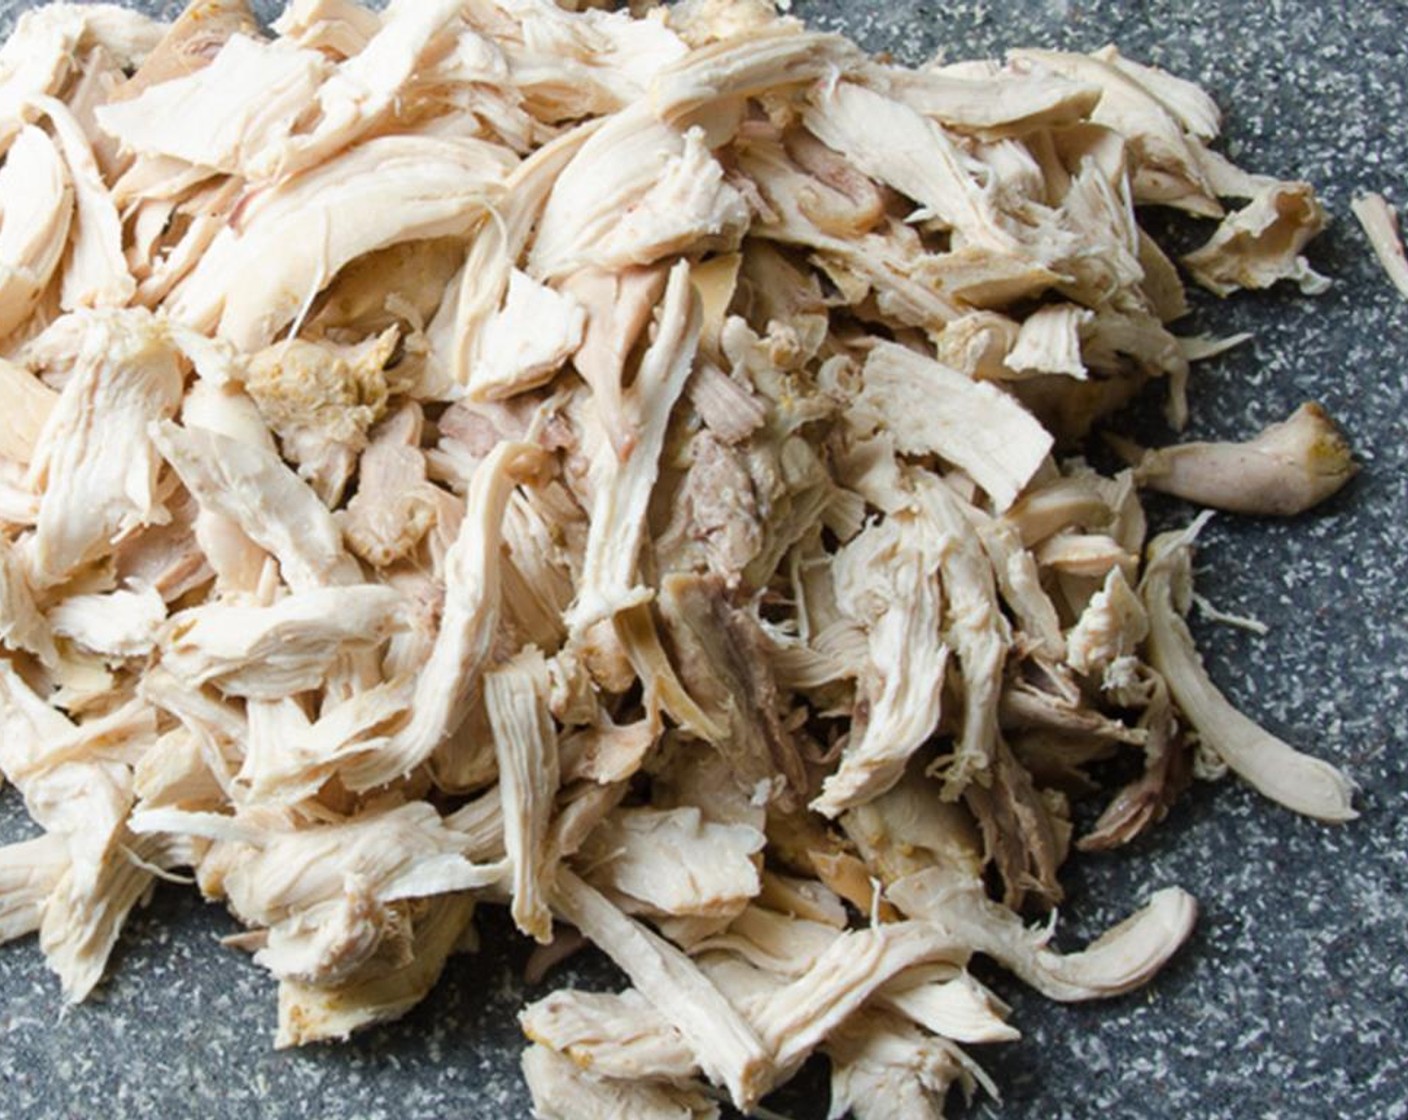 step 9 While vegetables are cooking, remove the meat from the chicken bones, discarding any fat, gristle, skin etc. Shred or cut the meat into bite sized pieces.